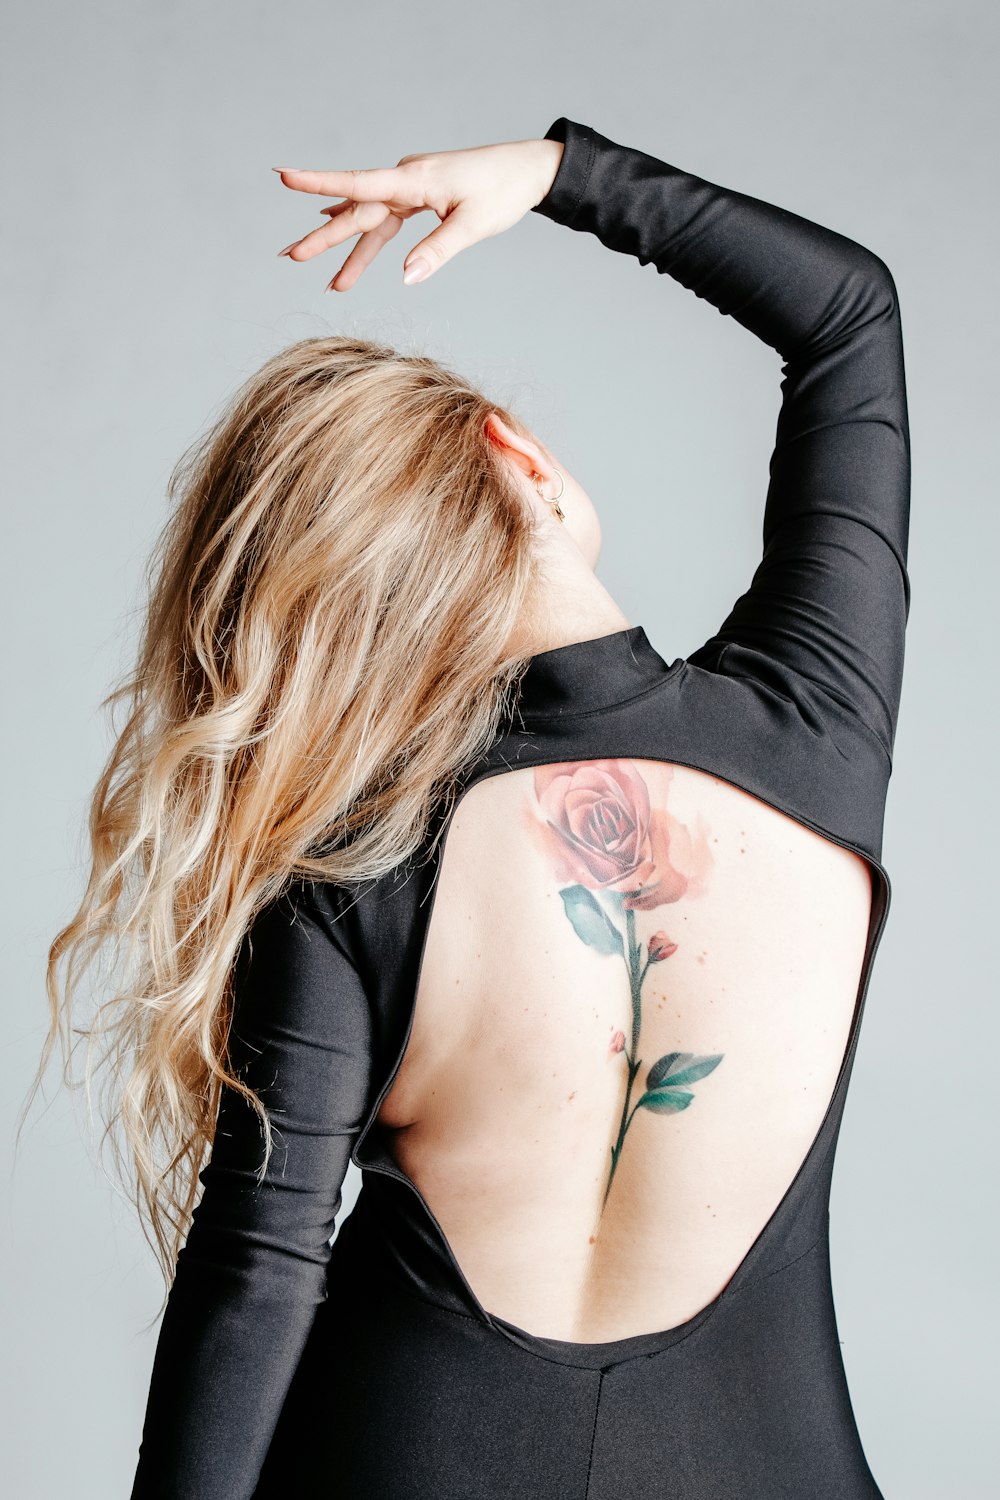 woman with red and green rose tattoo on her right arm